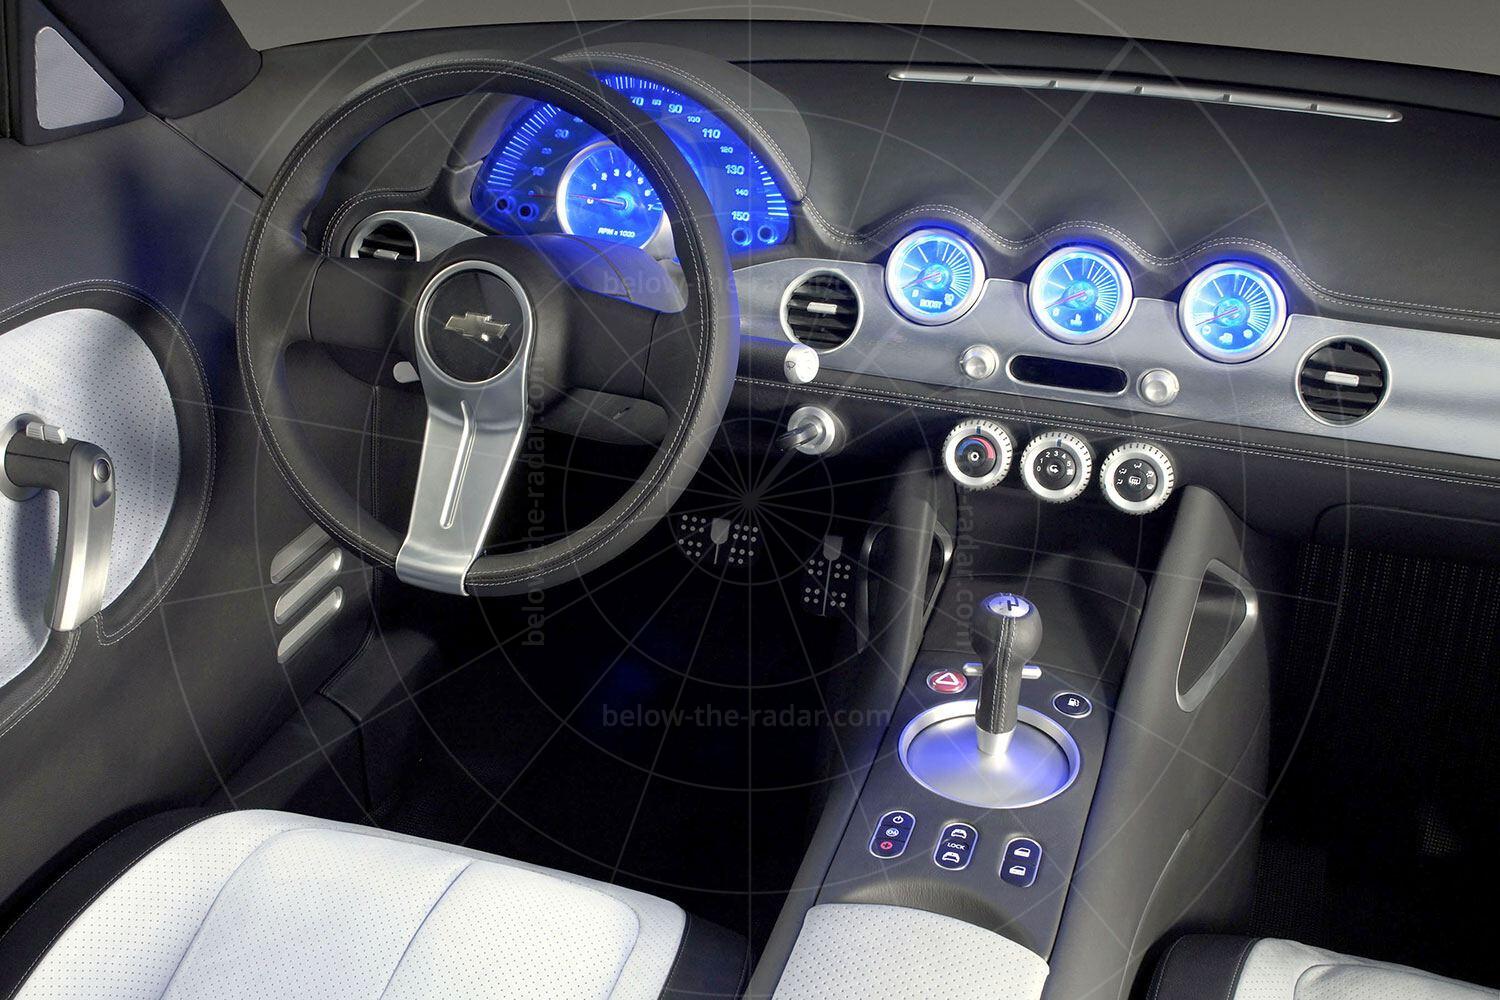 The 2004 Chevrolet Nomad concept - dashboard Pic: GM | The 2004 Chevrolet Nomad concept - dashboard